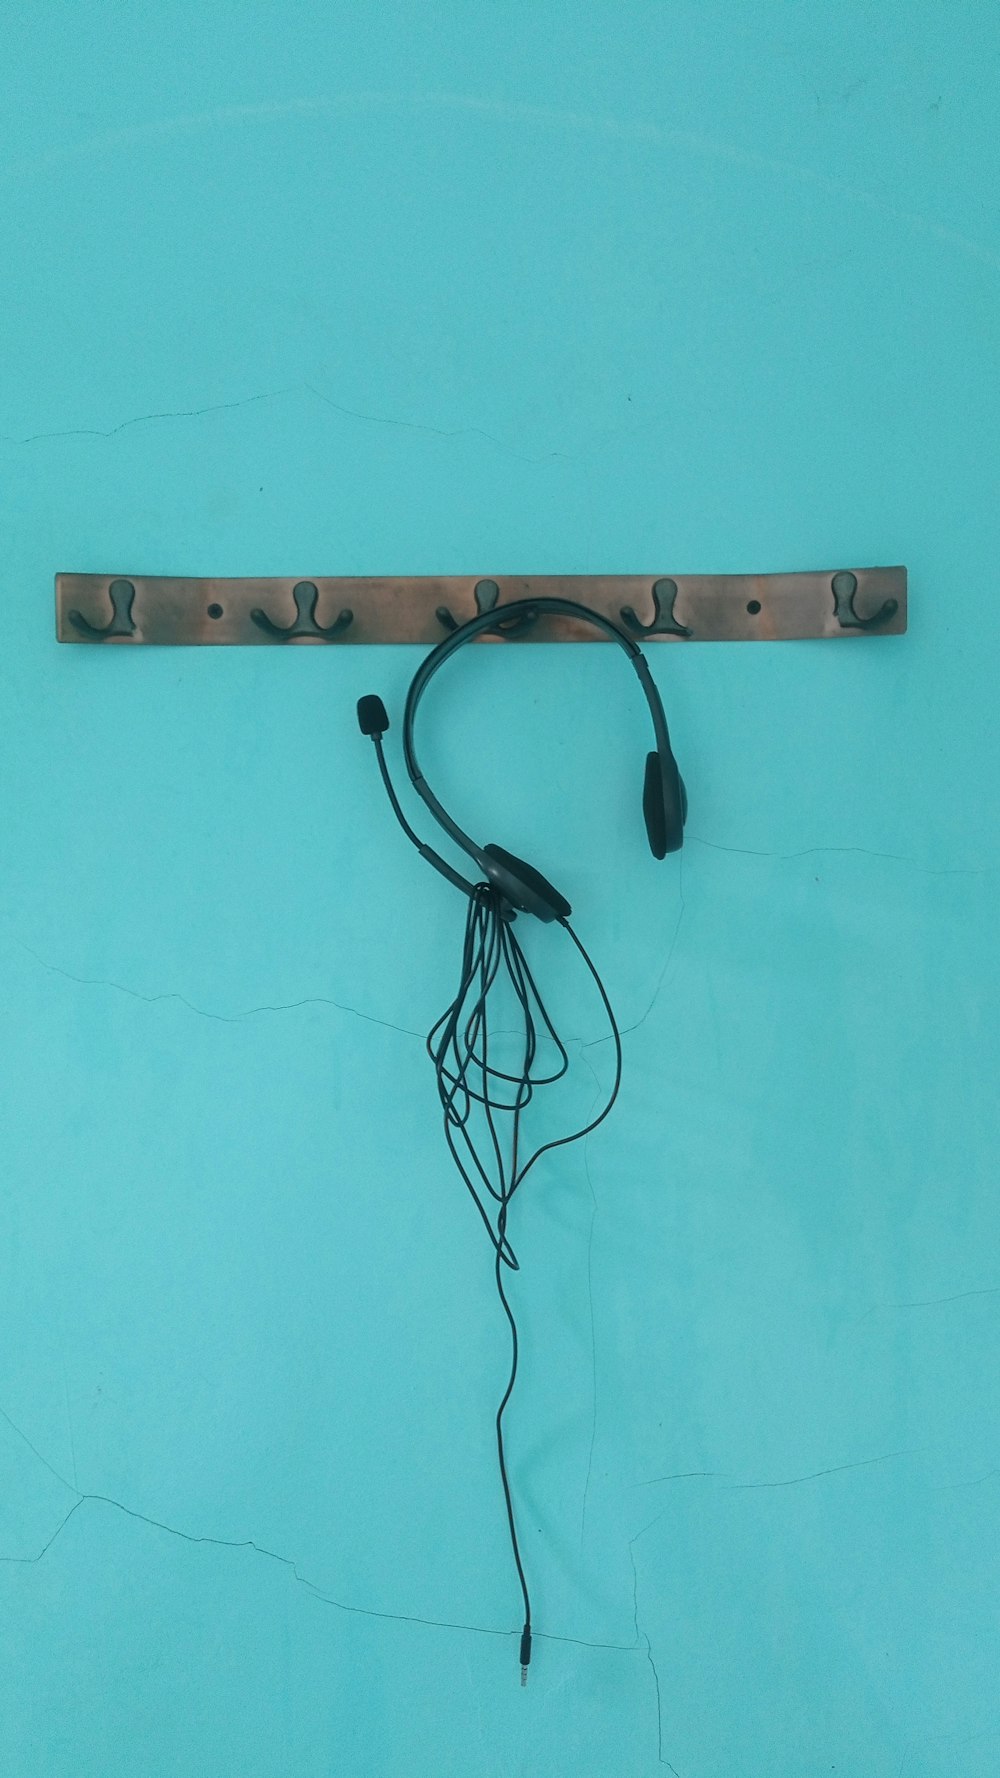 a wall mounted electrical device with wires attached to it